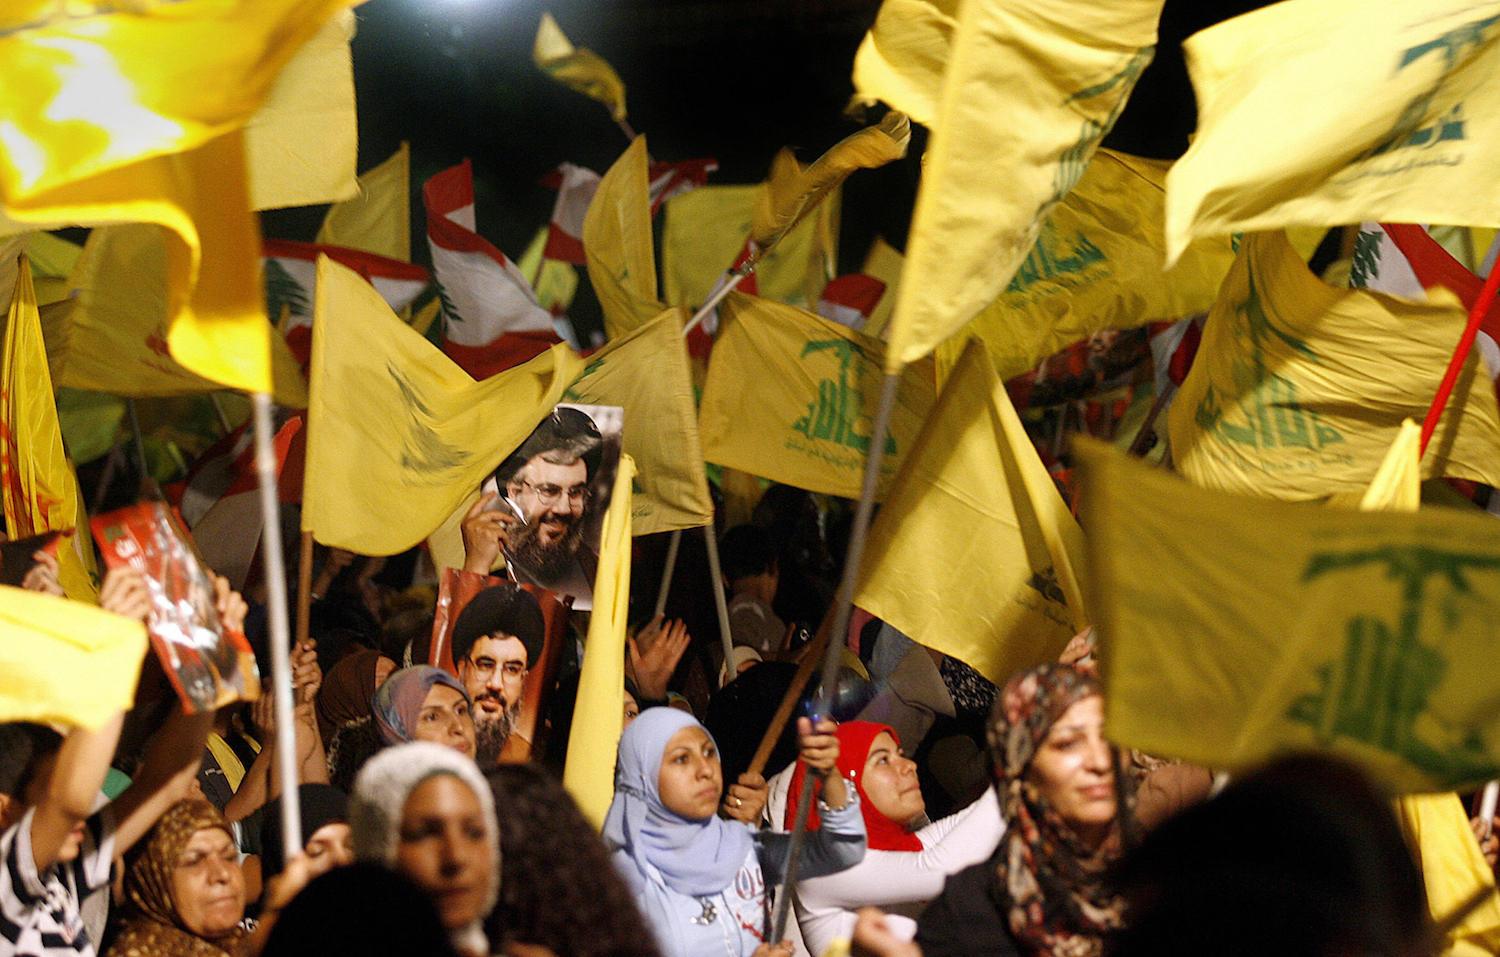 Images of Hezbollah chief Hassan Nasrallah are seen among scores of Hezbollah and Lebanese national flags being waved by Hezbollah supporters during a ceremony to mark first anniversary of the war with Israel, 14 August 2007. Nasrallah reiterated to a mass rally broadcast live on television that his Shiite group had won a divine victory. "Today is the anniversary of the divine victory," Nasrallah told the thousands of men, women and children who had gathered in an empty lot of Beirut's southern suburb of Dahiyeh controlled by Hezbollah. AFP PHOTO/MARWAN NAAMANI (Photo credit should read MARWAN NAAMANI/AFP/Getty Images)